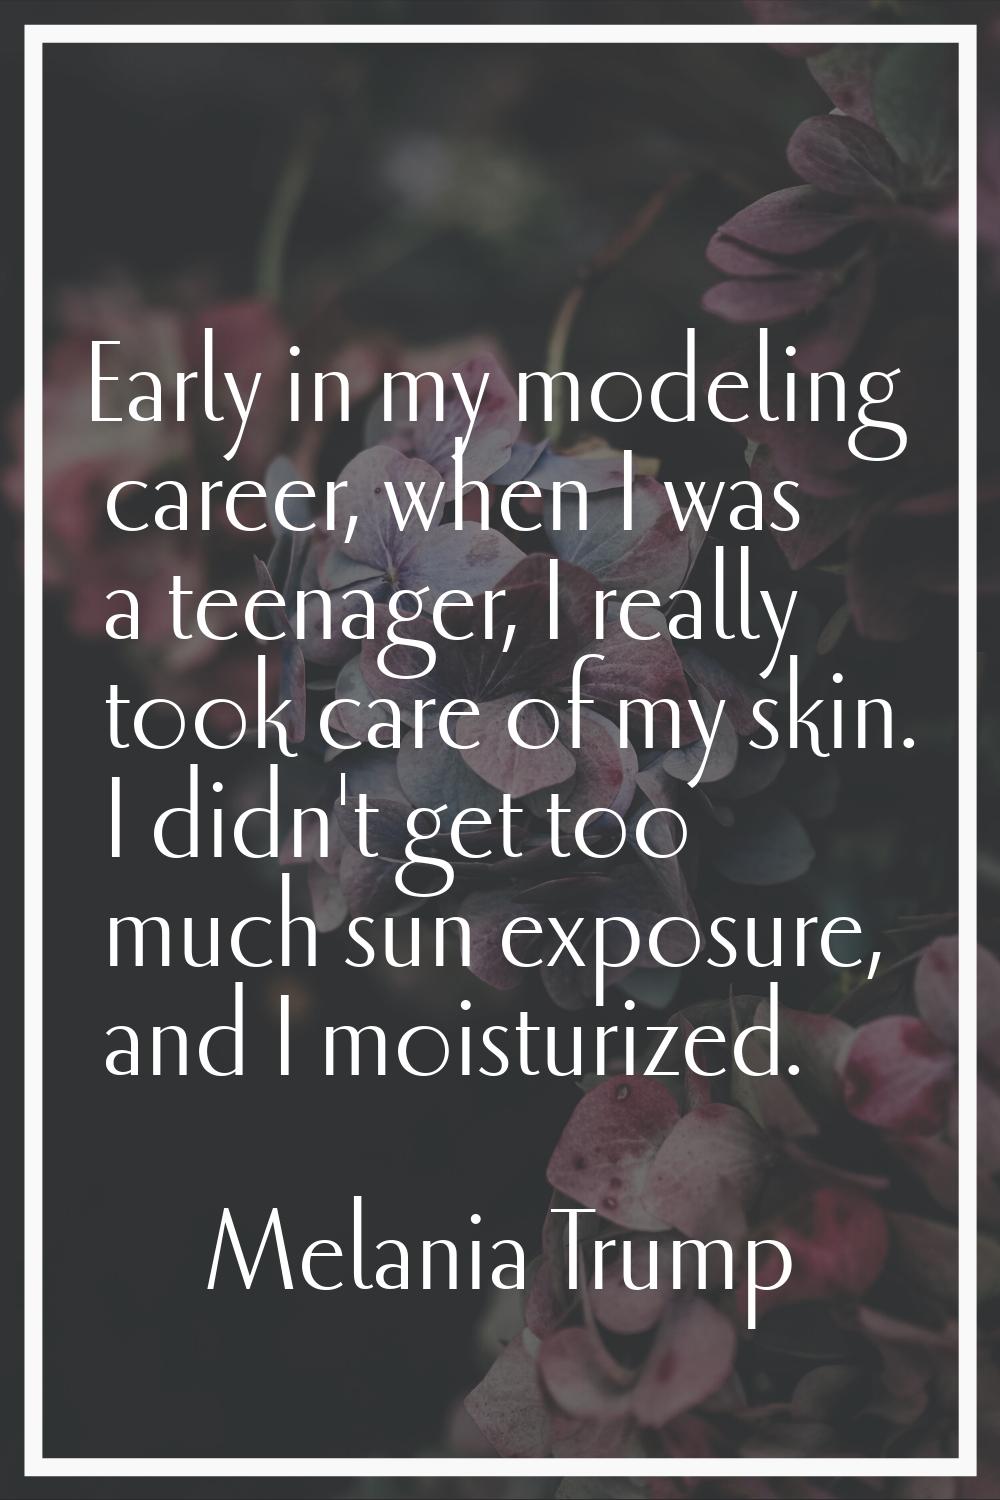 Early in my modeling career, when I was a teenager, I really took care of my skin. I didn't get too